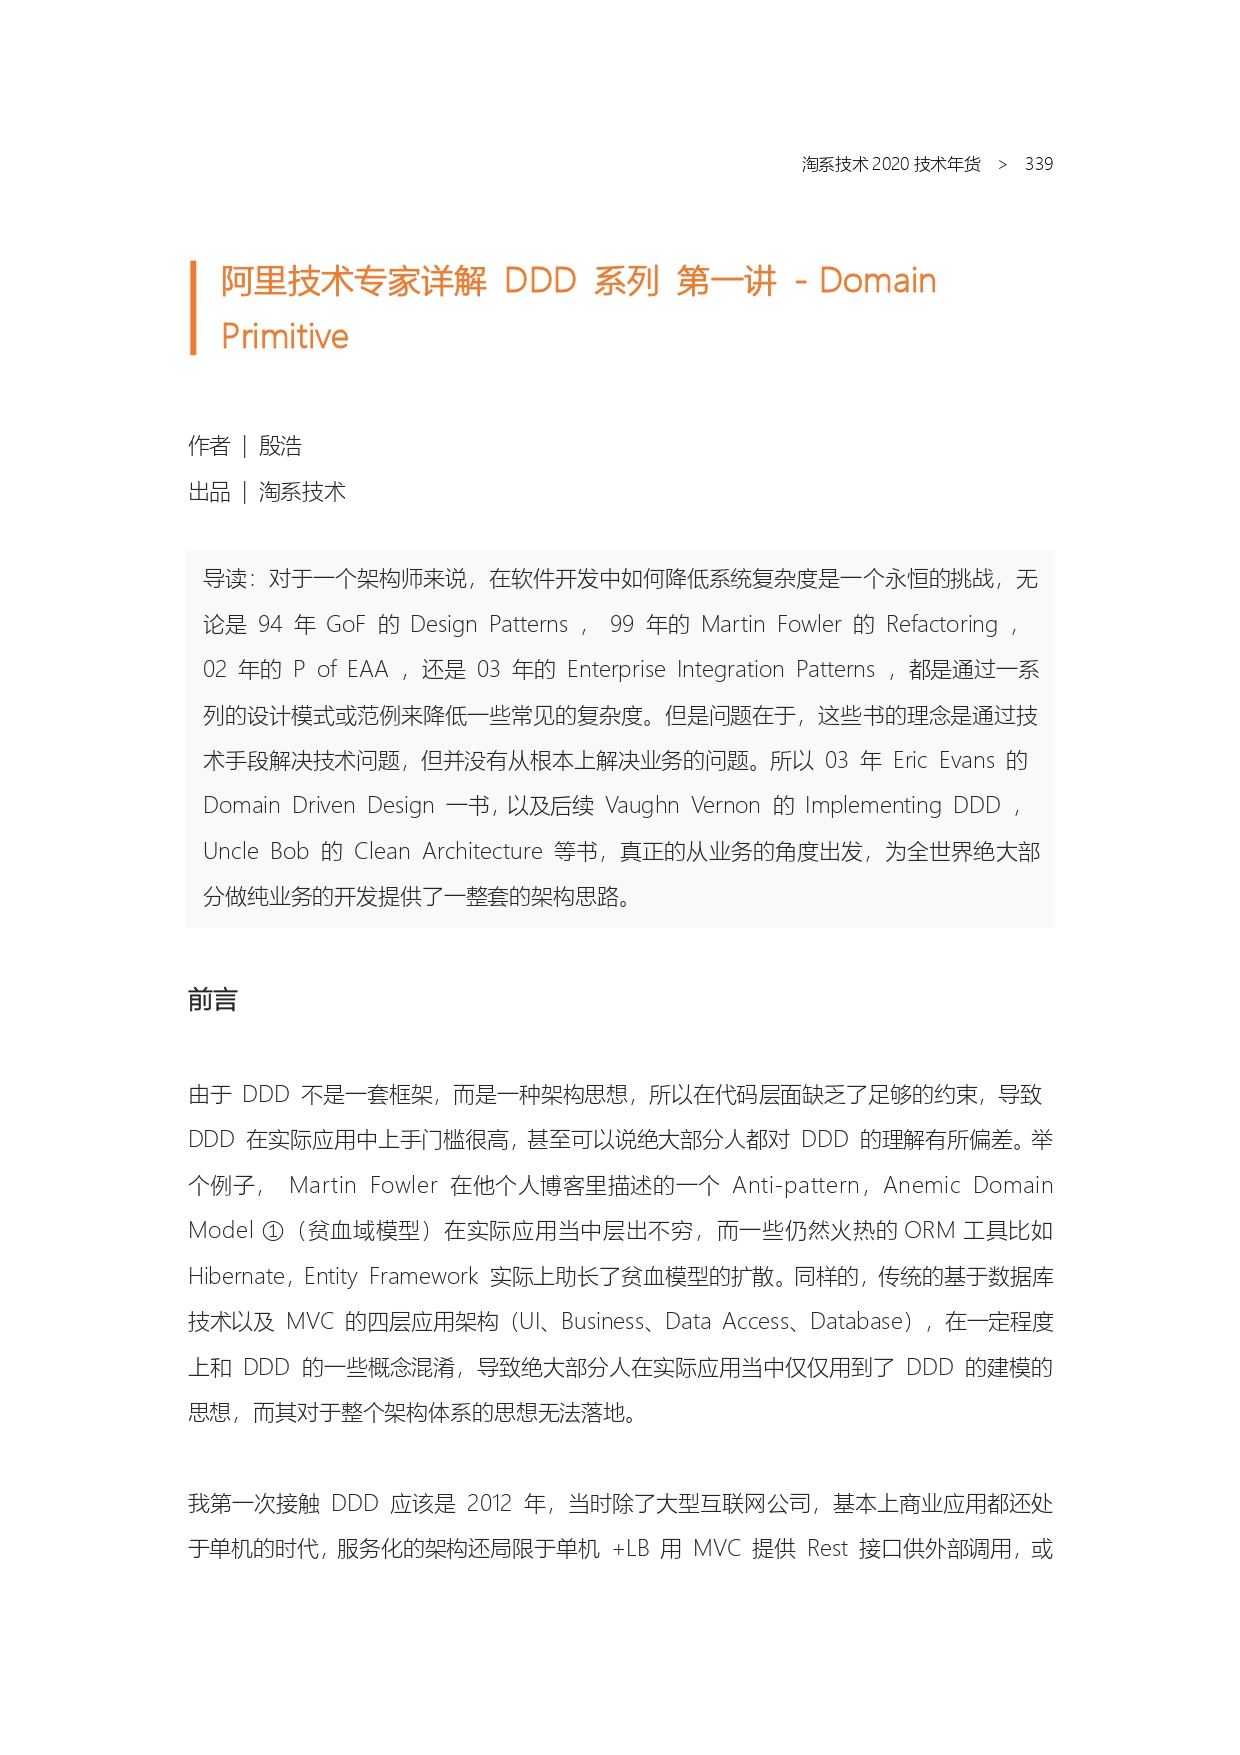 The Complete Works of Tao Technology 2020-1-570_page-0339.jpg